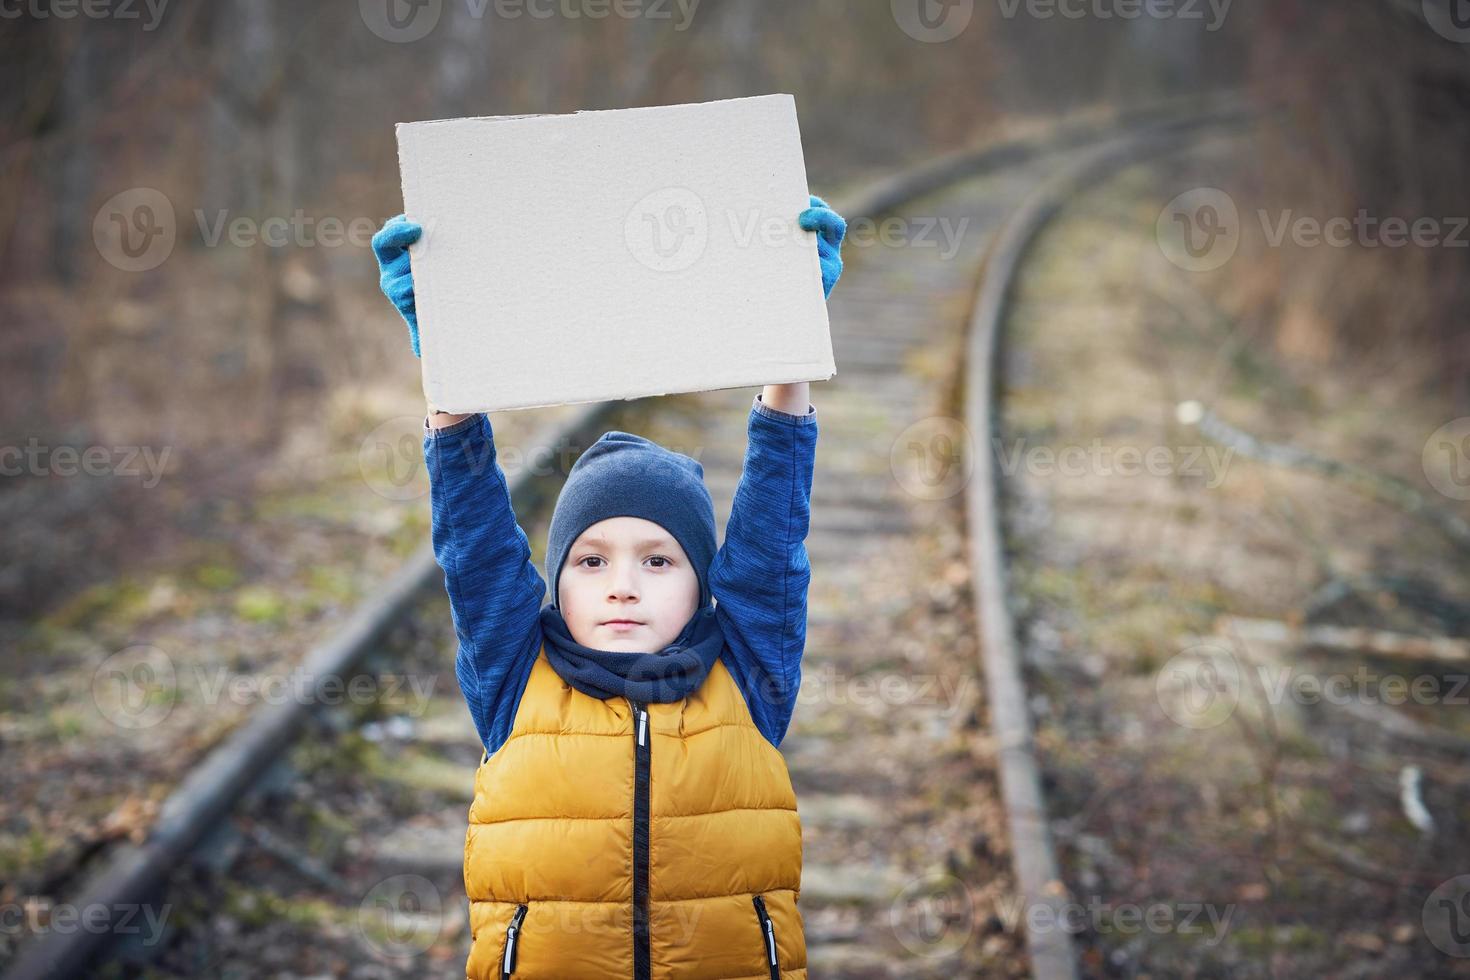 Picture of a child with a lot of love and peaceful message photo